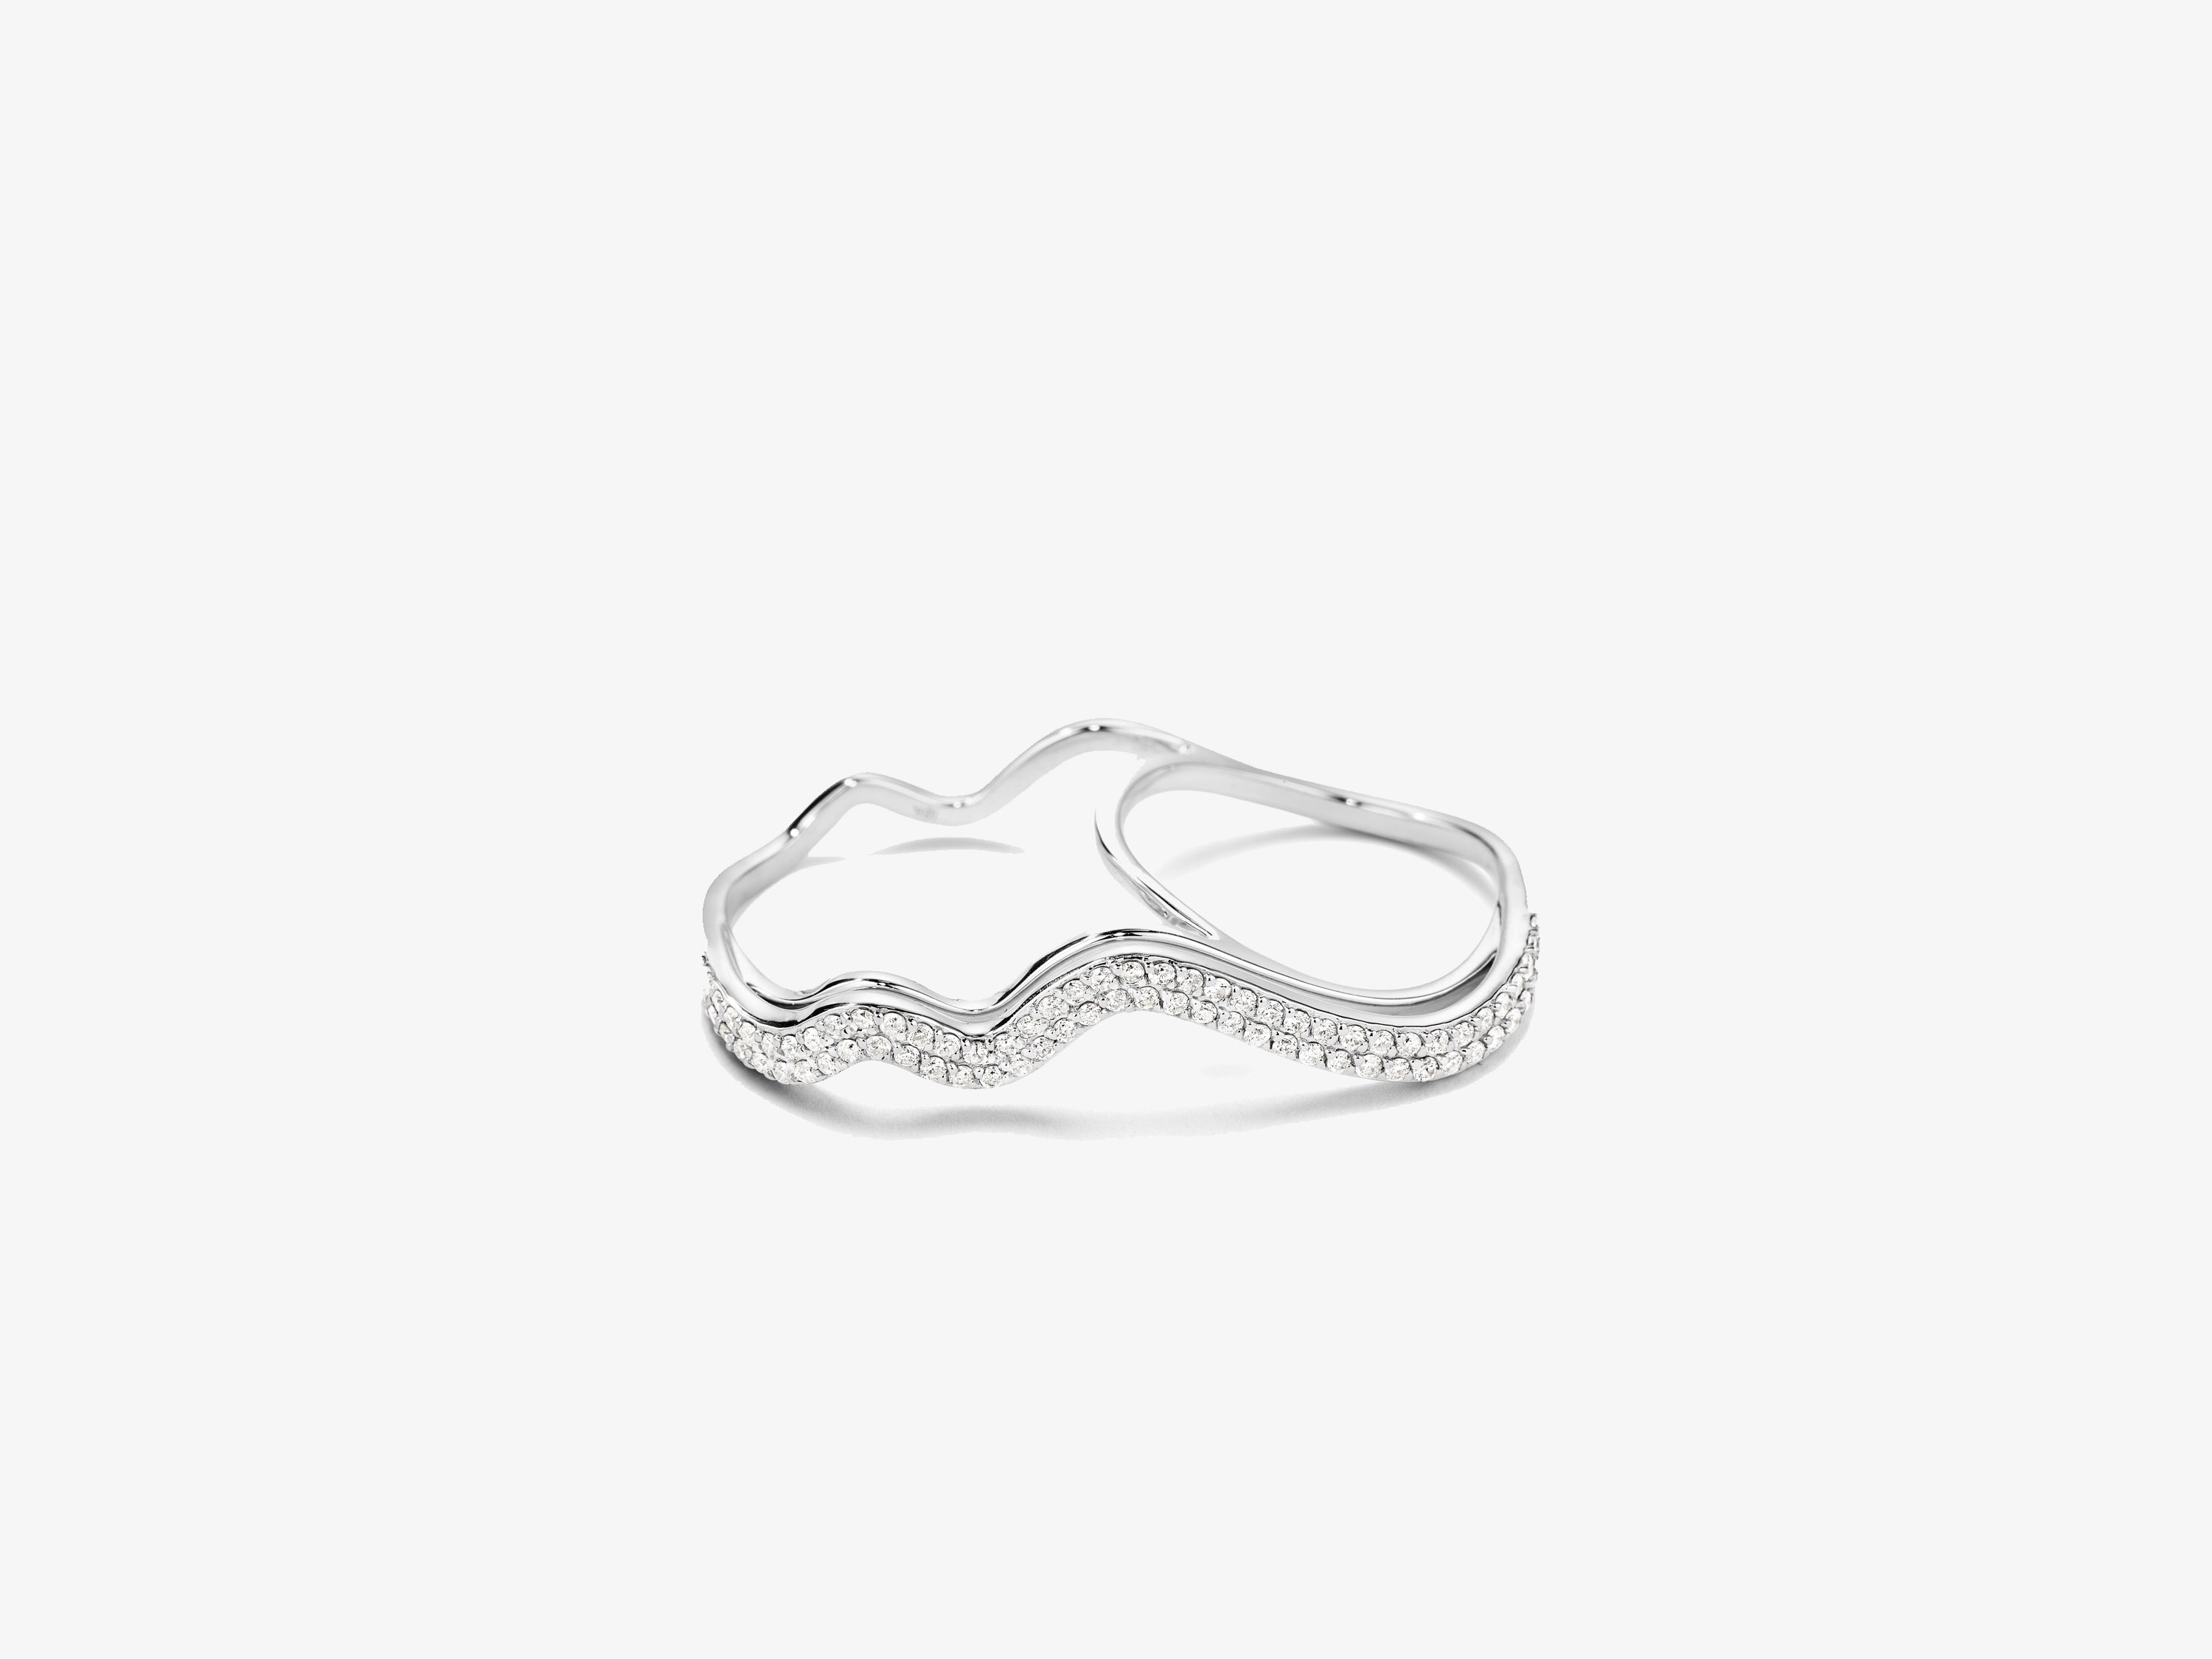 Flow Wavy Three Dimensional Double Finger Ring with Double Row Full Diamond Pave